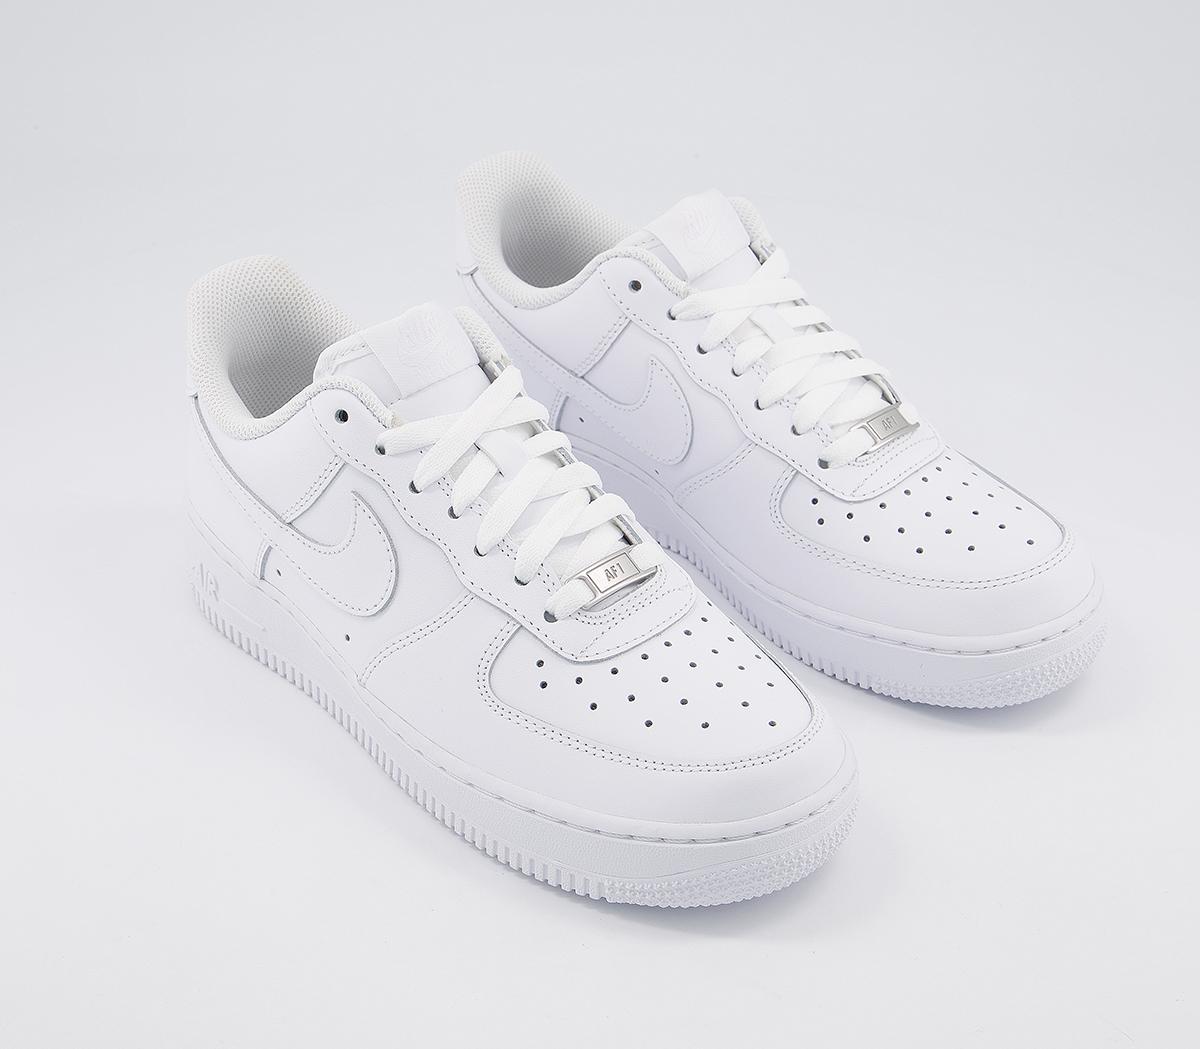 Nike Air Force 1 Trainers White - His trainers